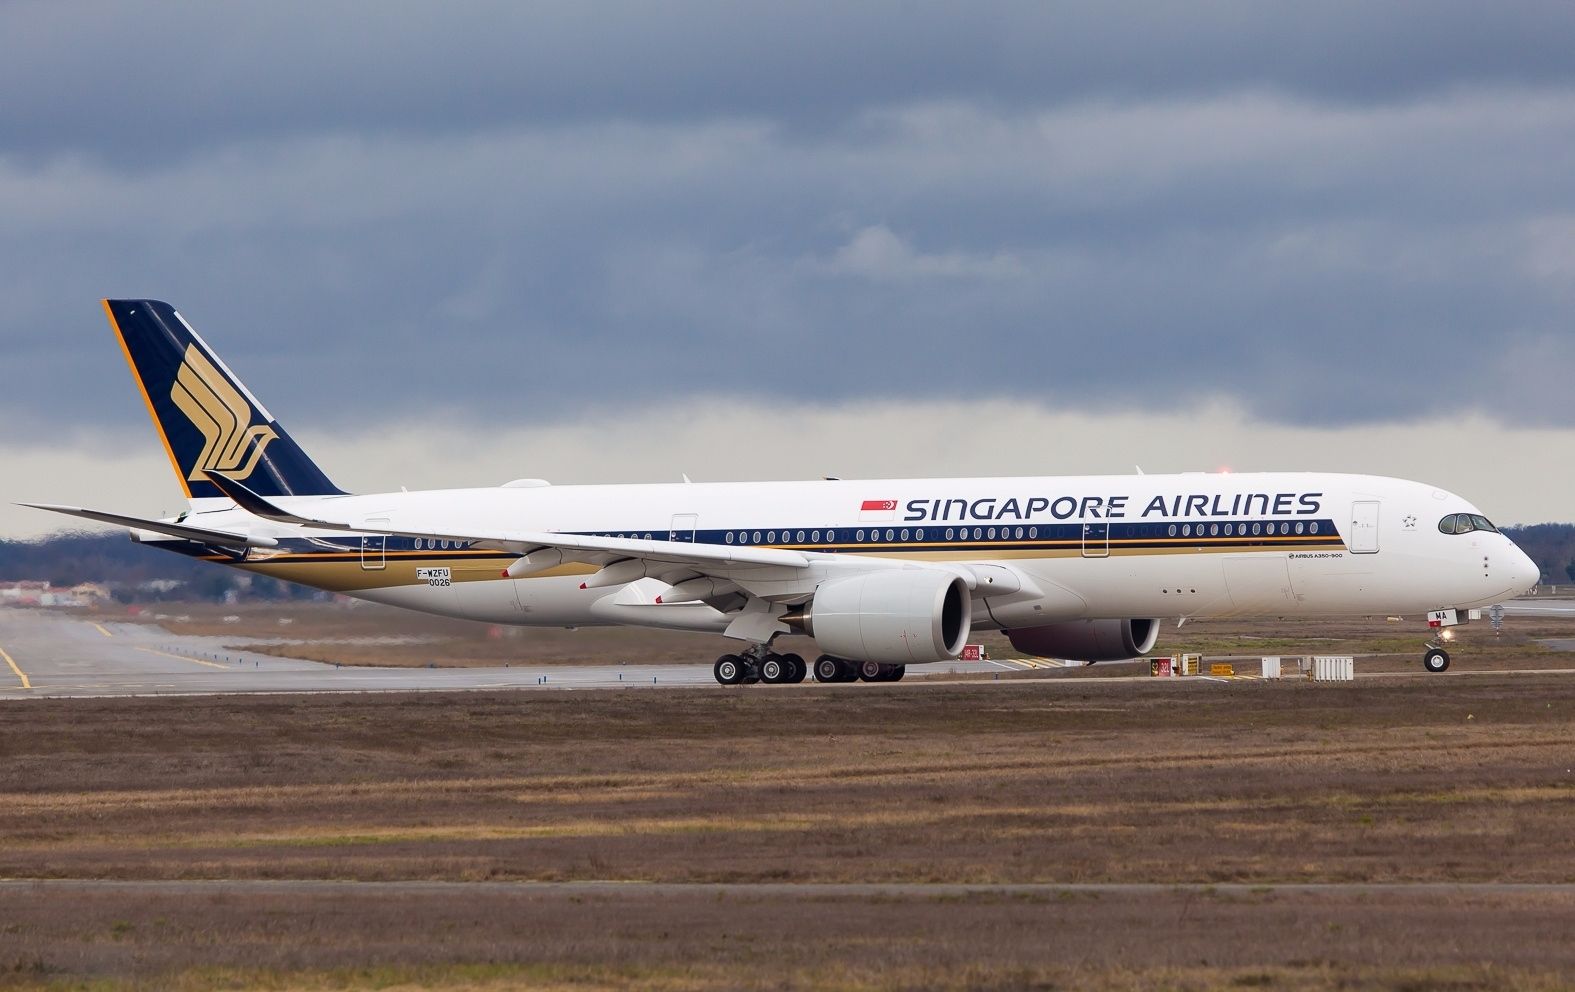 A new beginning for Singapore Airlines